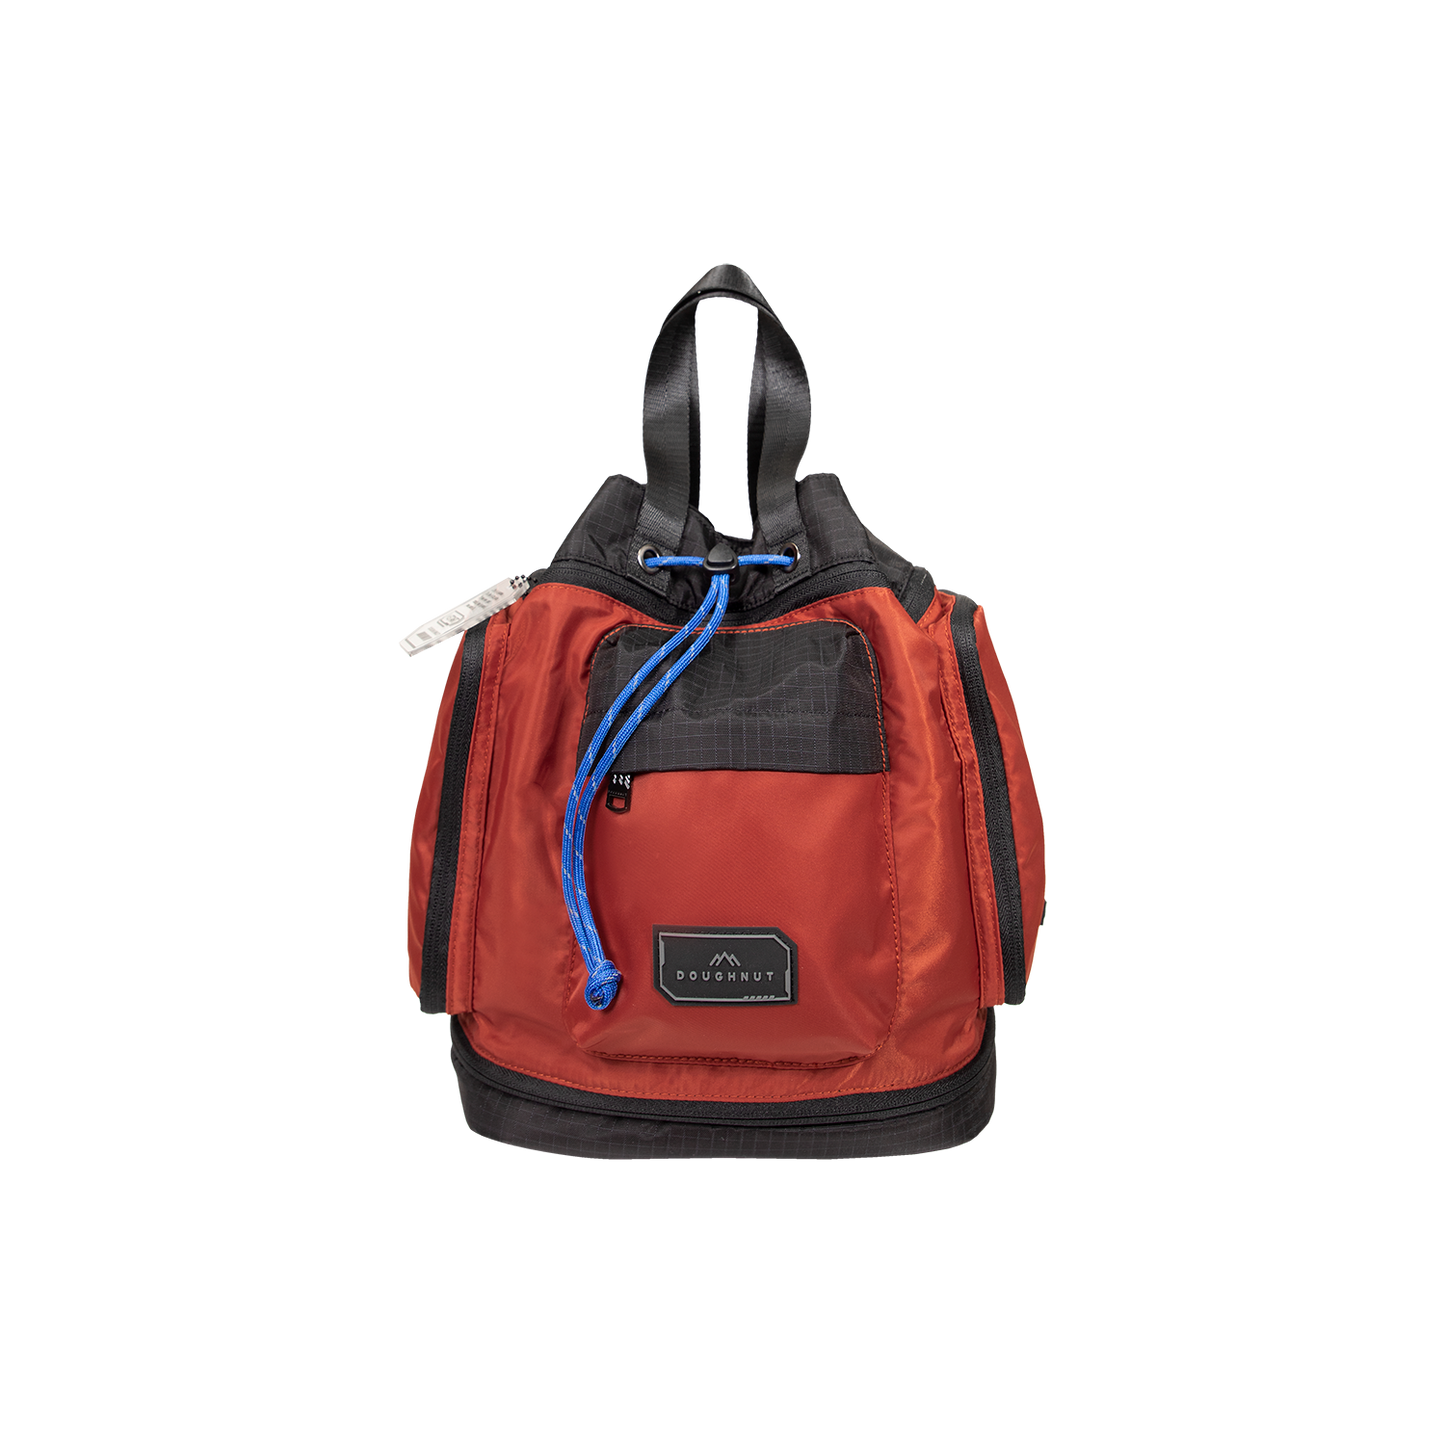 Pyramid Gamescape Series Backpack